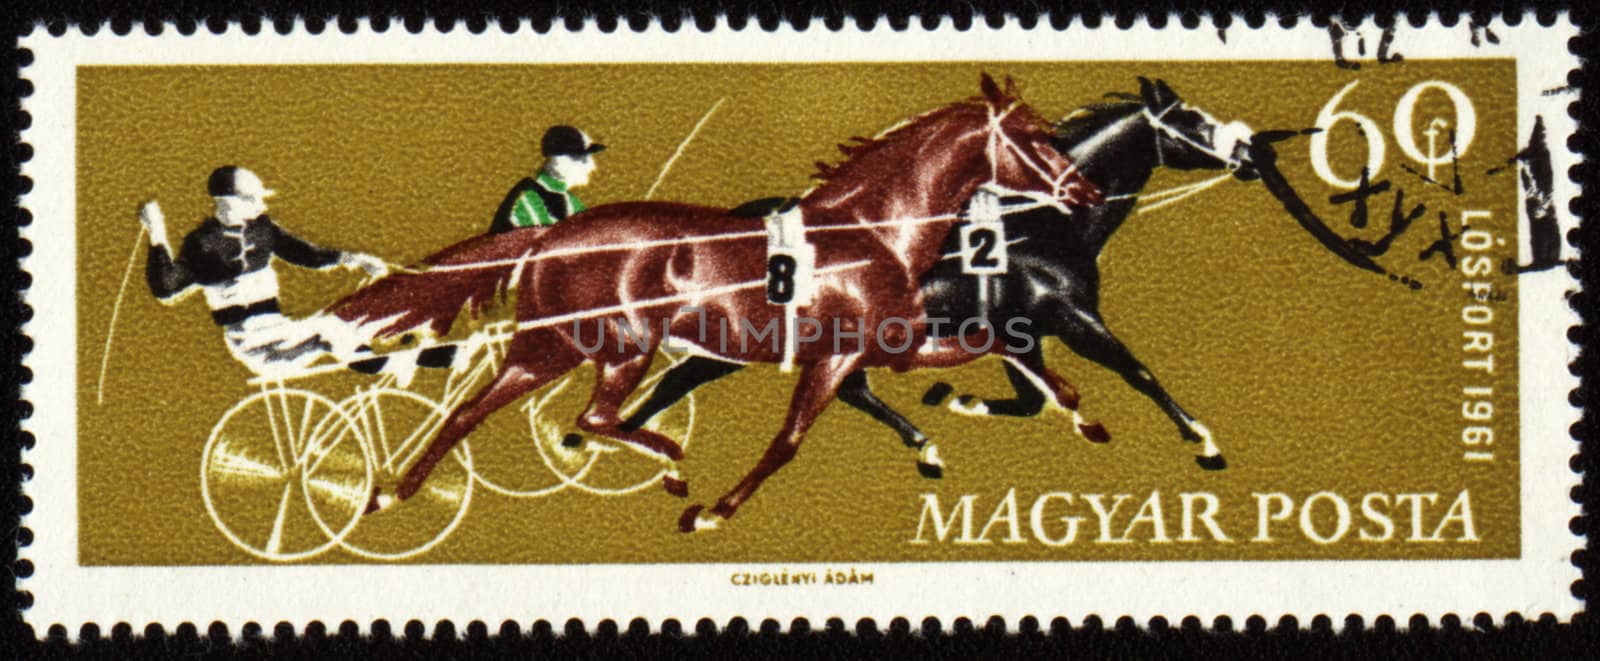 Competition in chariot race on post stamp by wander